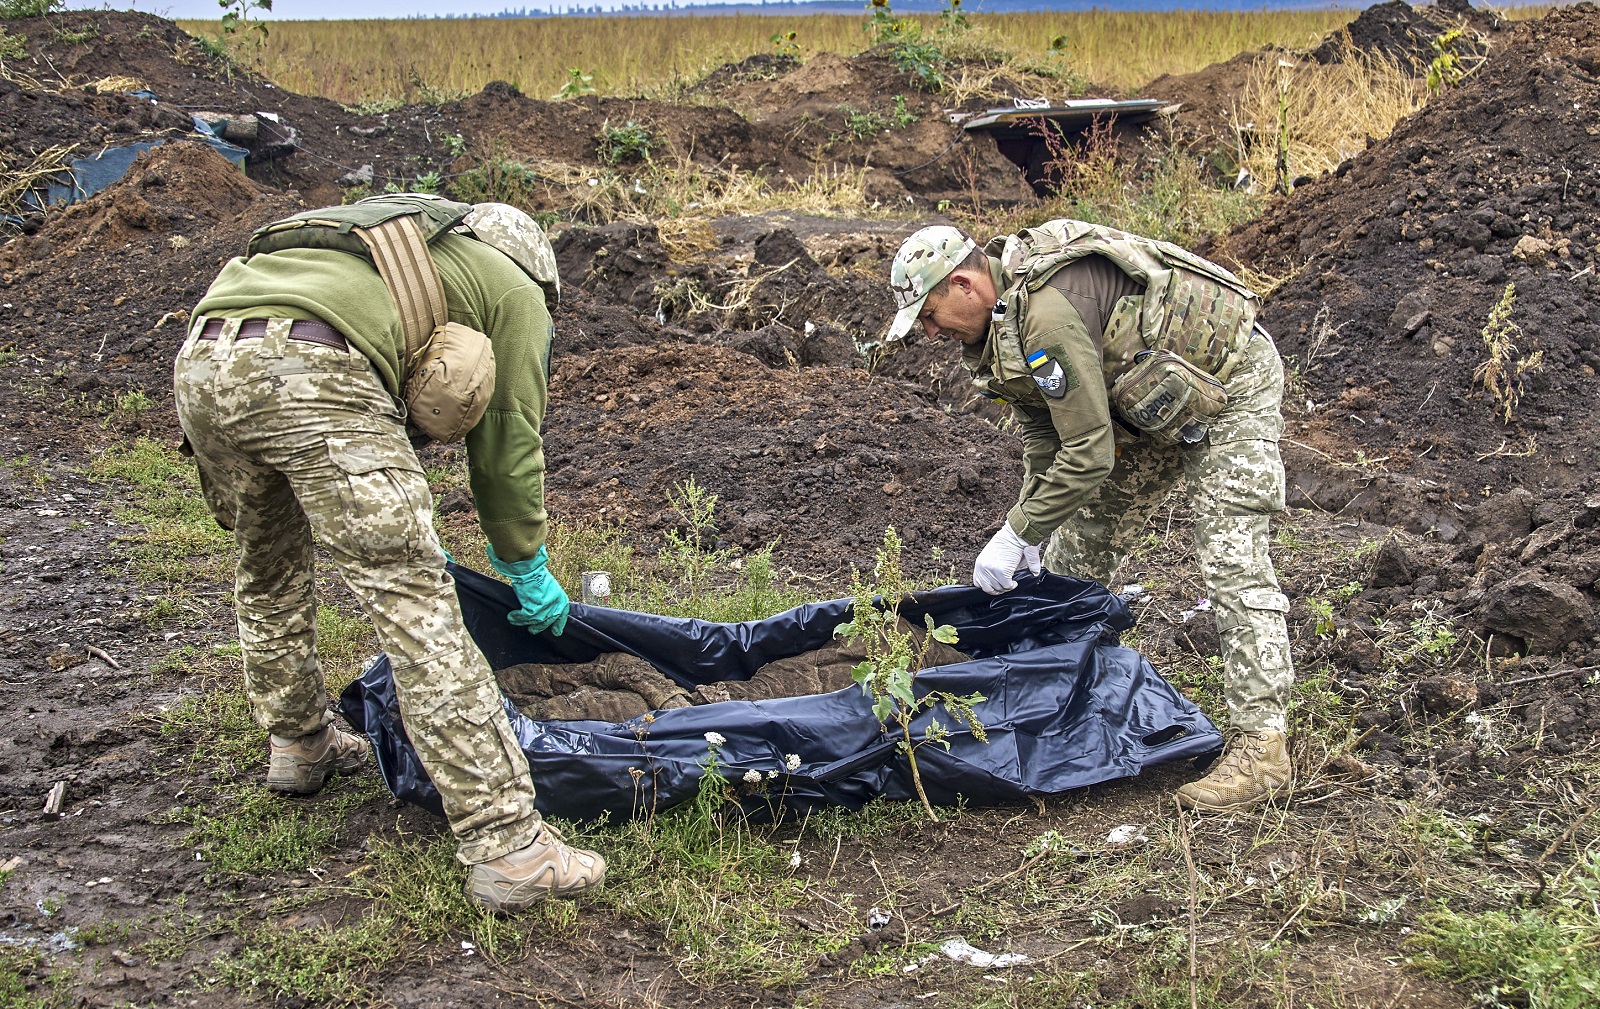 epa10188478 Ukrainian soldiers, members of a special evacuation team, exhume the body of a Ukrainian National Guard soldier who was killed in fighting in the first days of Russia's invasion, near the urban settlement Kazachya Lopan, north of Kharkiv, northeastern Ukraine, 16 September 2022. The Ukrainian army pushed Russian troops from occupied territory in the northeast of the country in a counterattack. Kharkiv and surrounding areas have been the target of heavy shelling since February 2022, when Russian troops entered Ukraine starting a conflict that has provoked destruction and a humanitarian crisis.  EPA/SERGEY KOZLOV -- ATTENTION EDITORS: GRAPHIC CONTENT